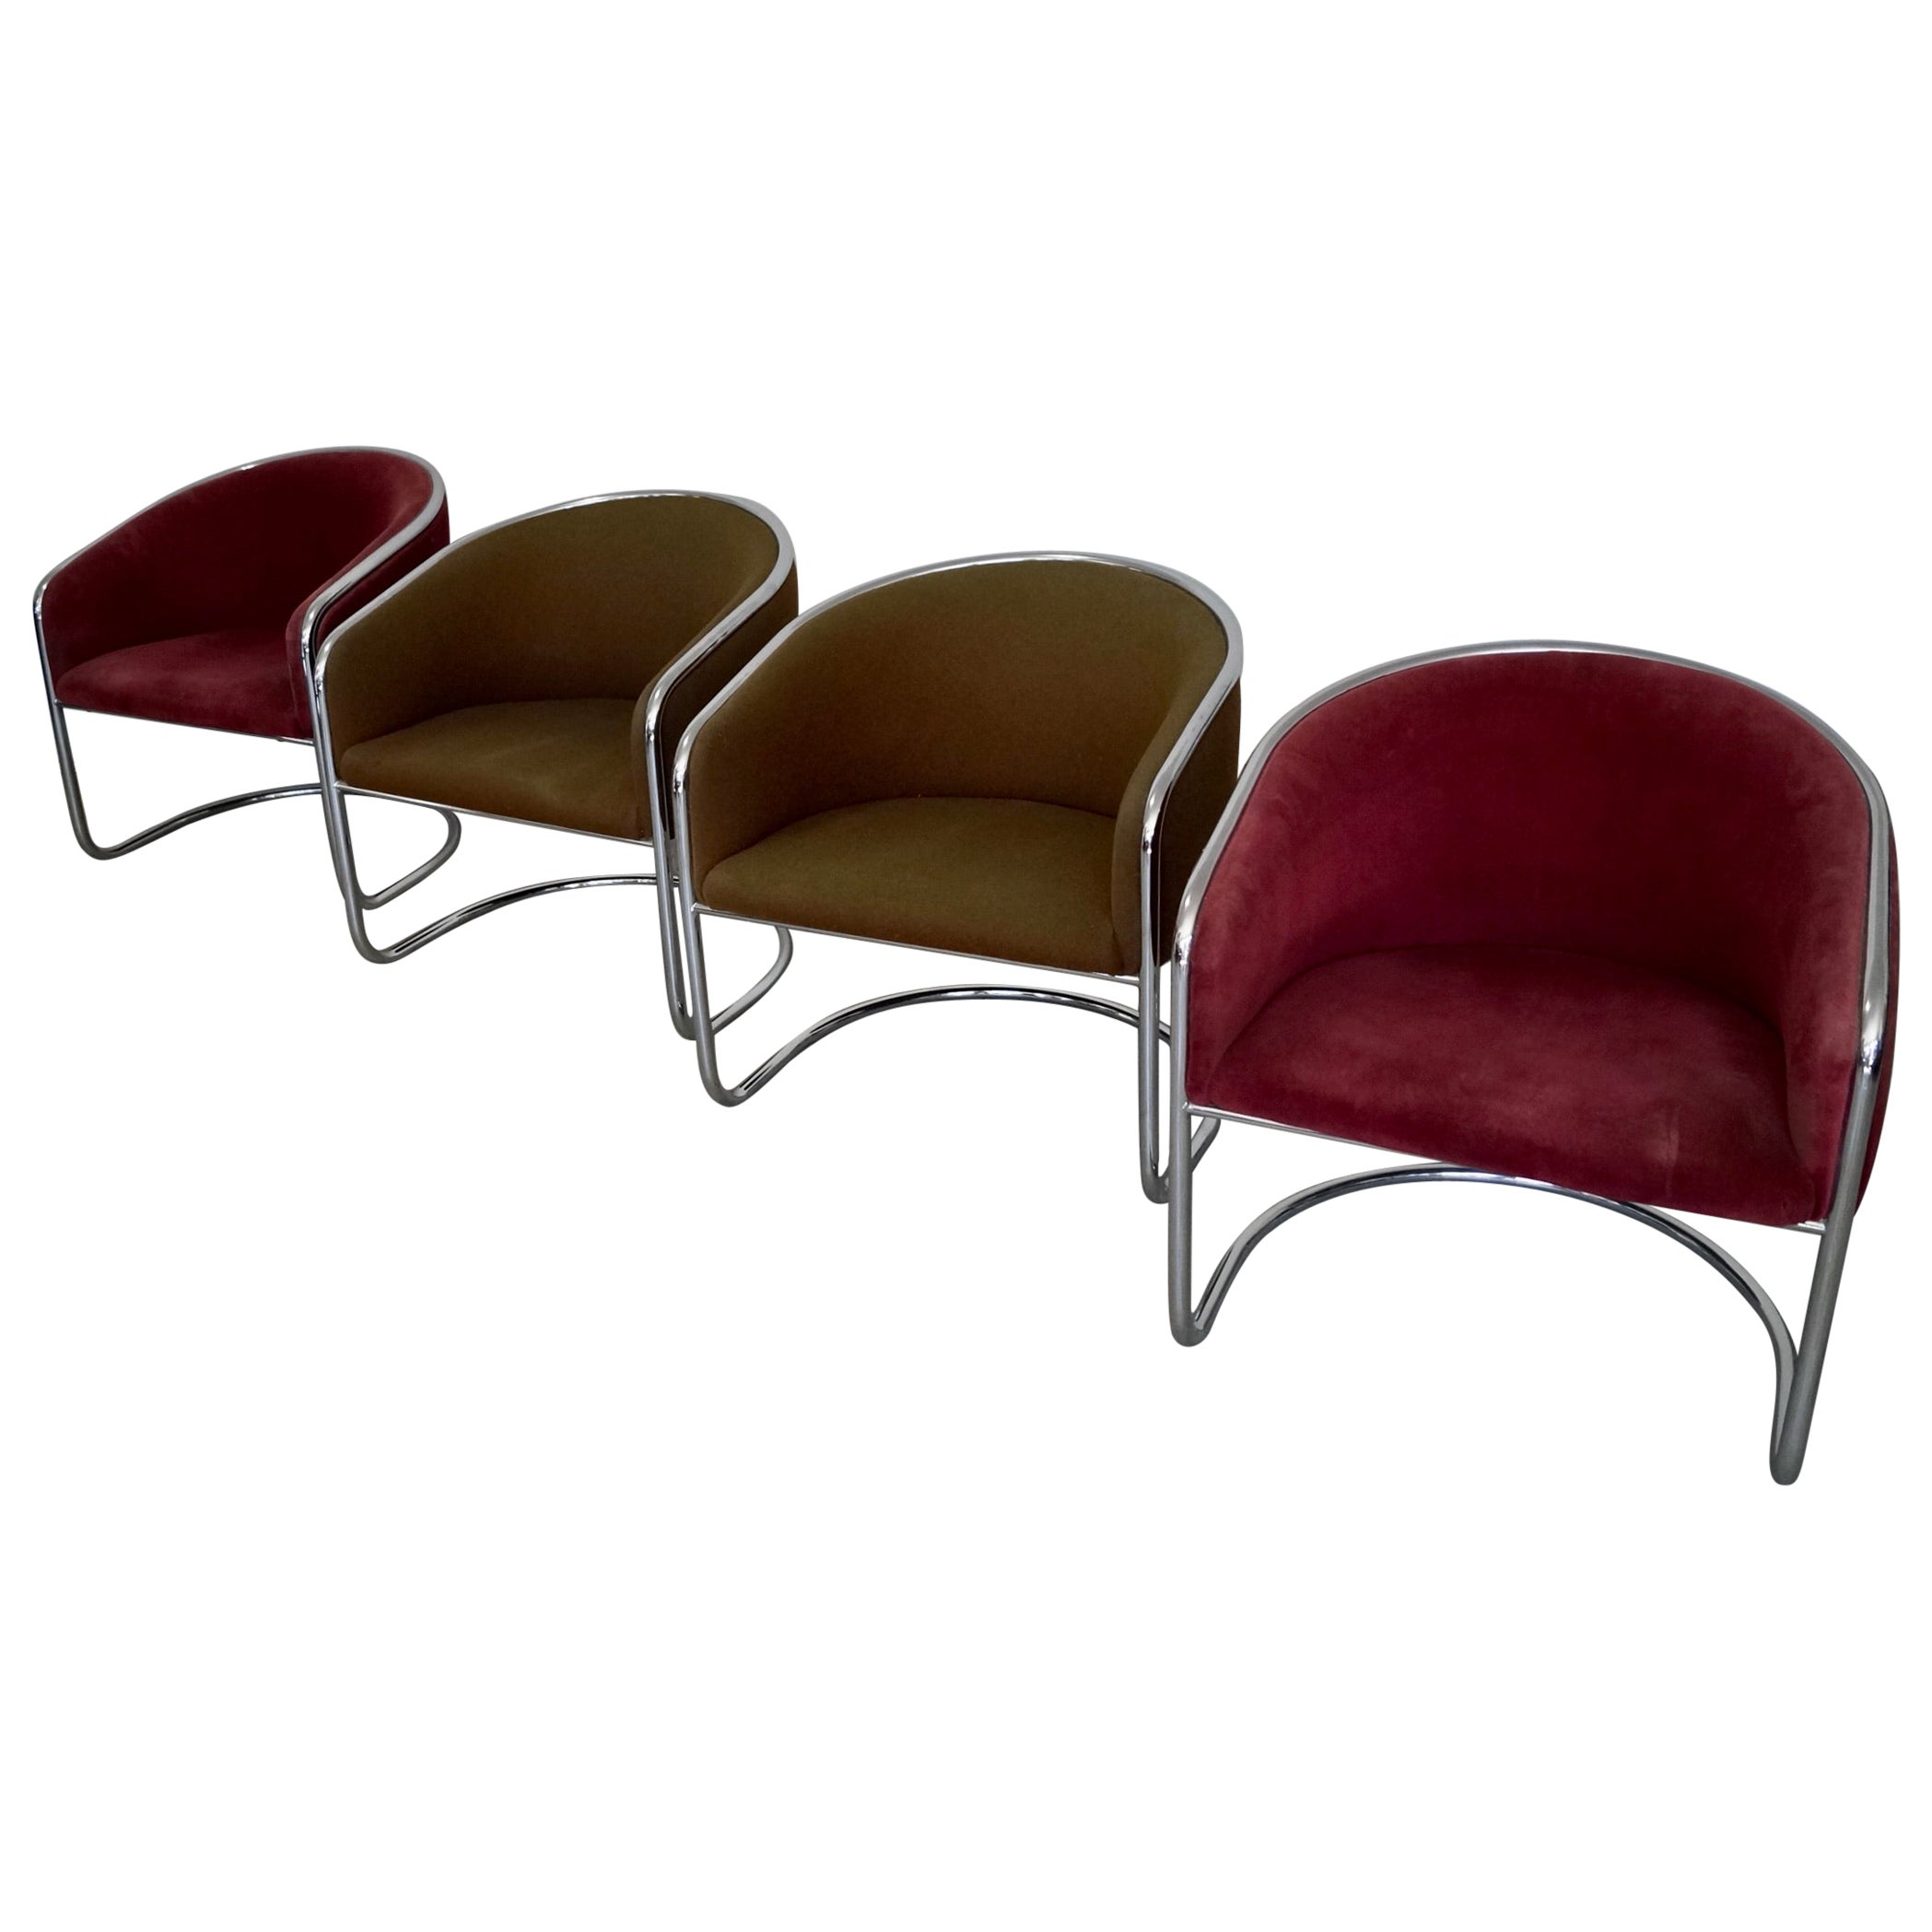 1970's Mid-Century Modern Thonet Chrome Armchairs - Set of Four For Sale